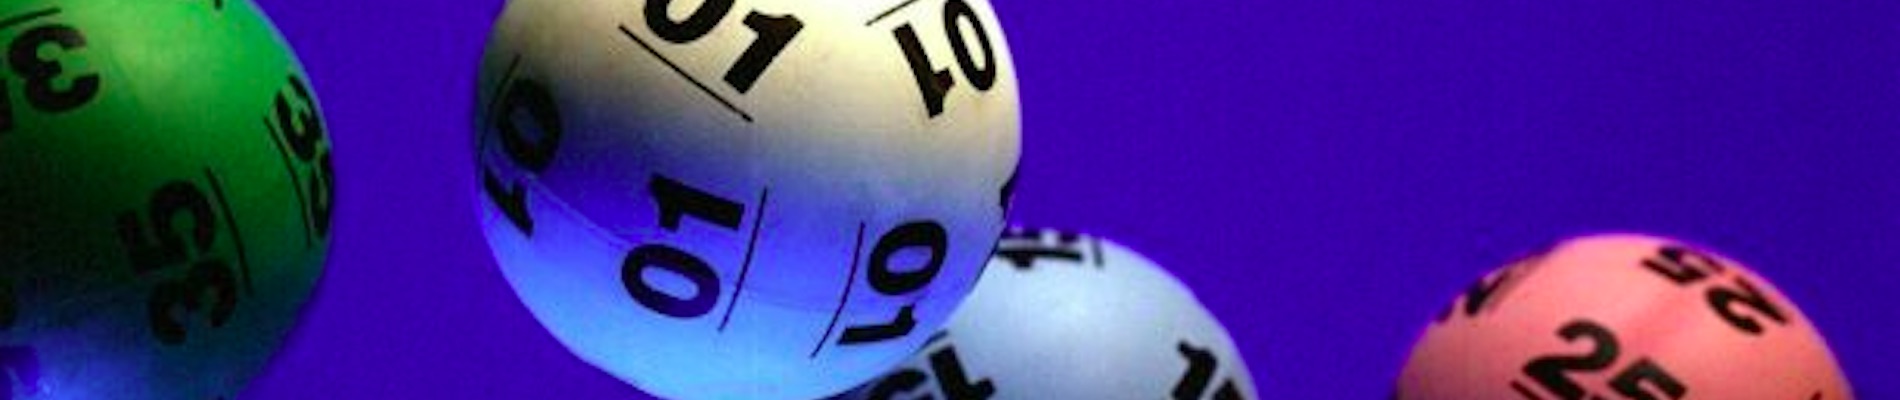 Camelot Loses National Lottery LIcense